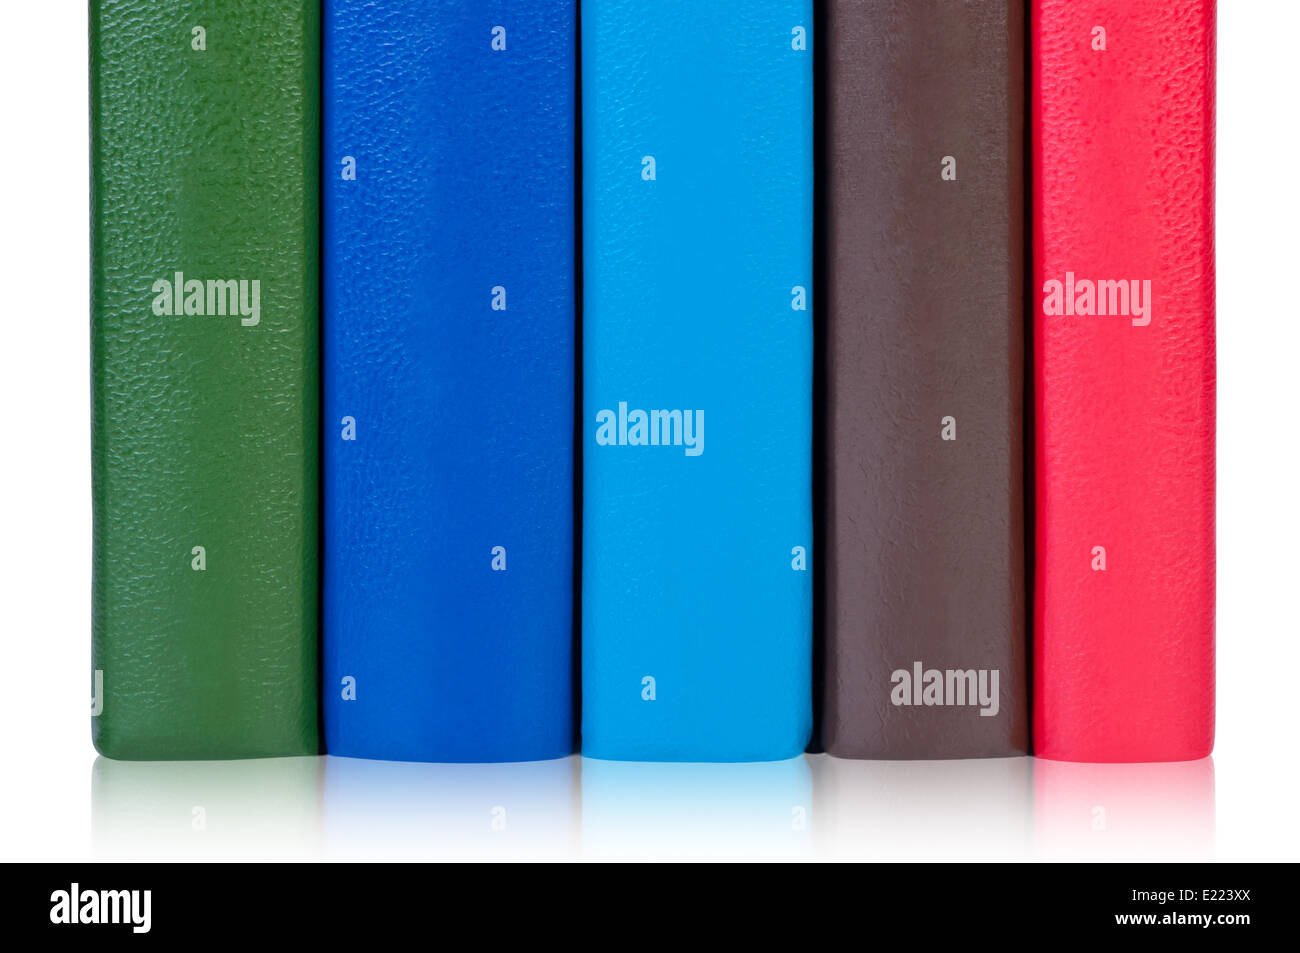 Books with colorful covers. Stock Photo